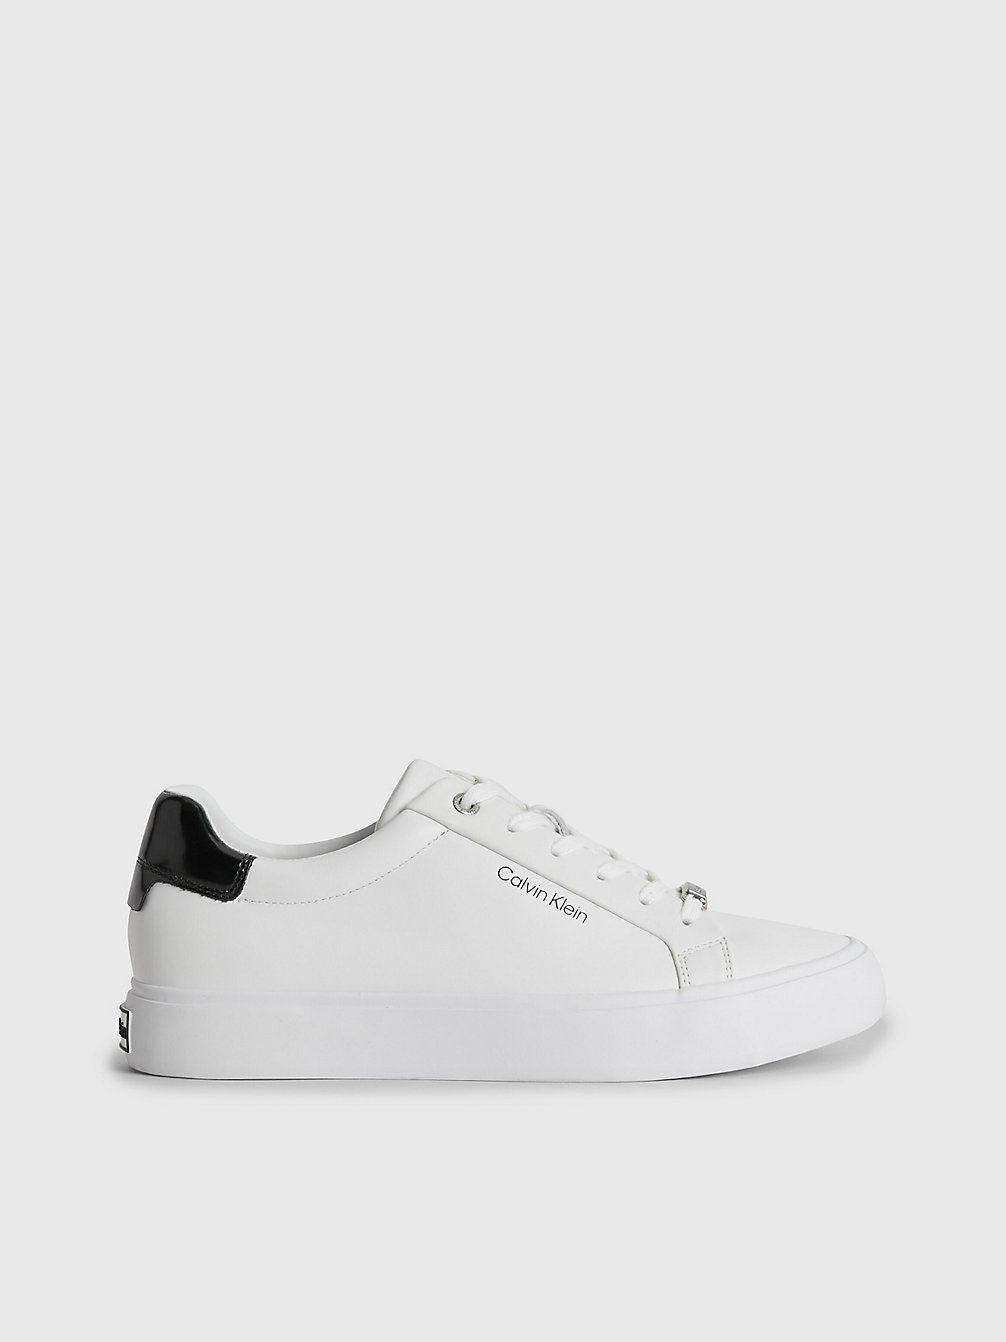 WHITE / BLACK Leather Trainers undefined women Calvin Klein